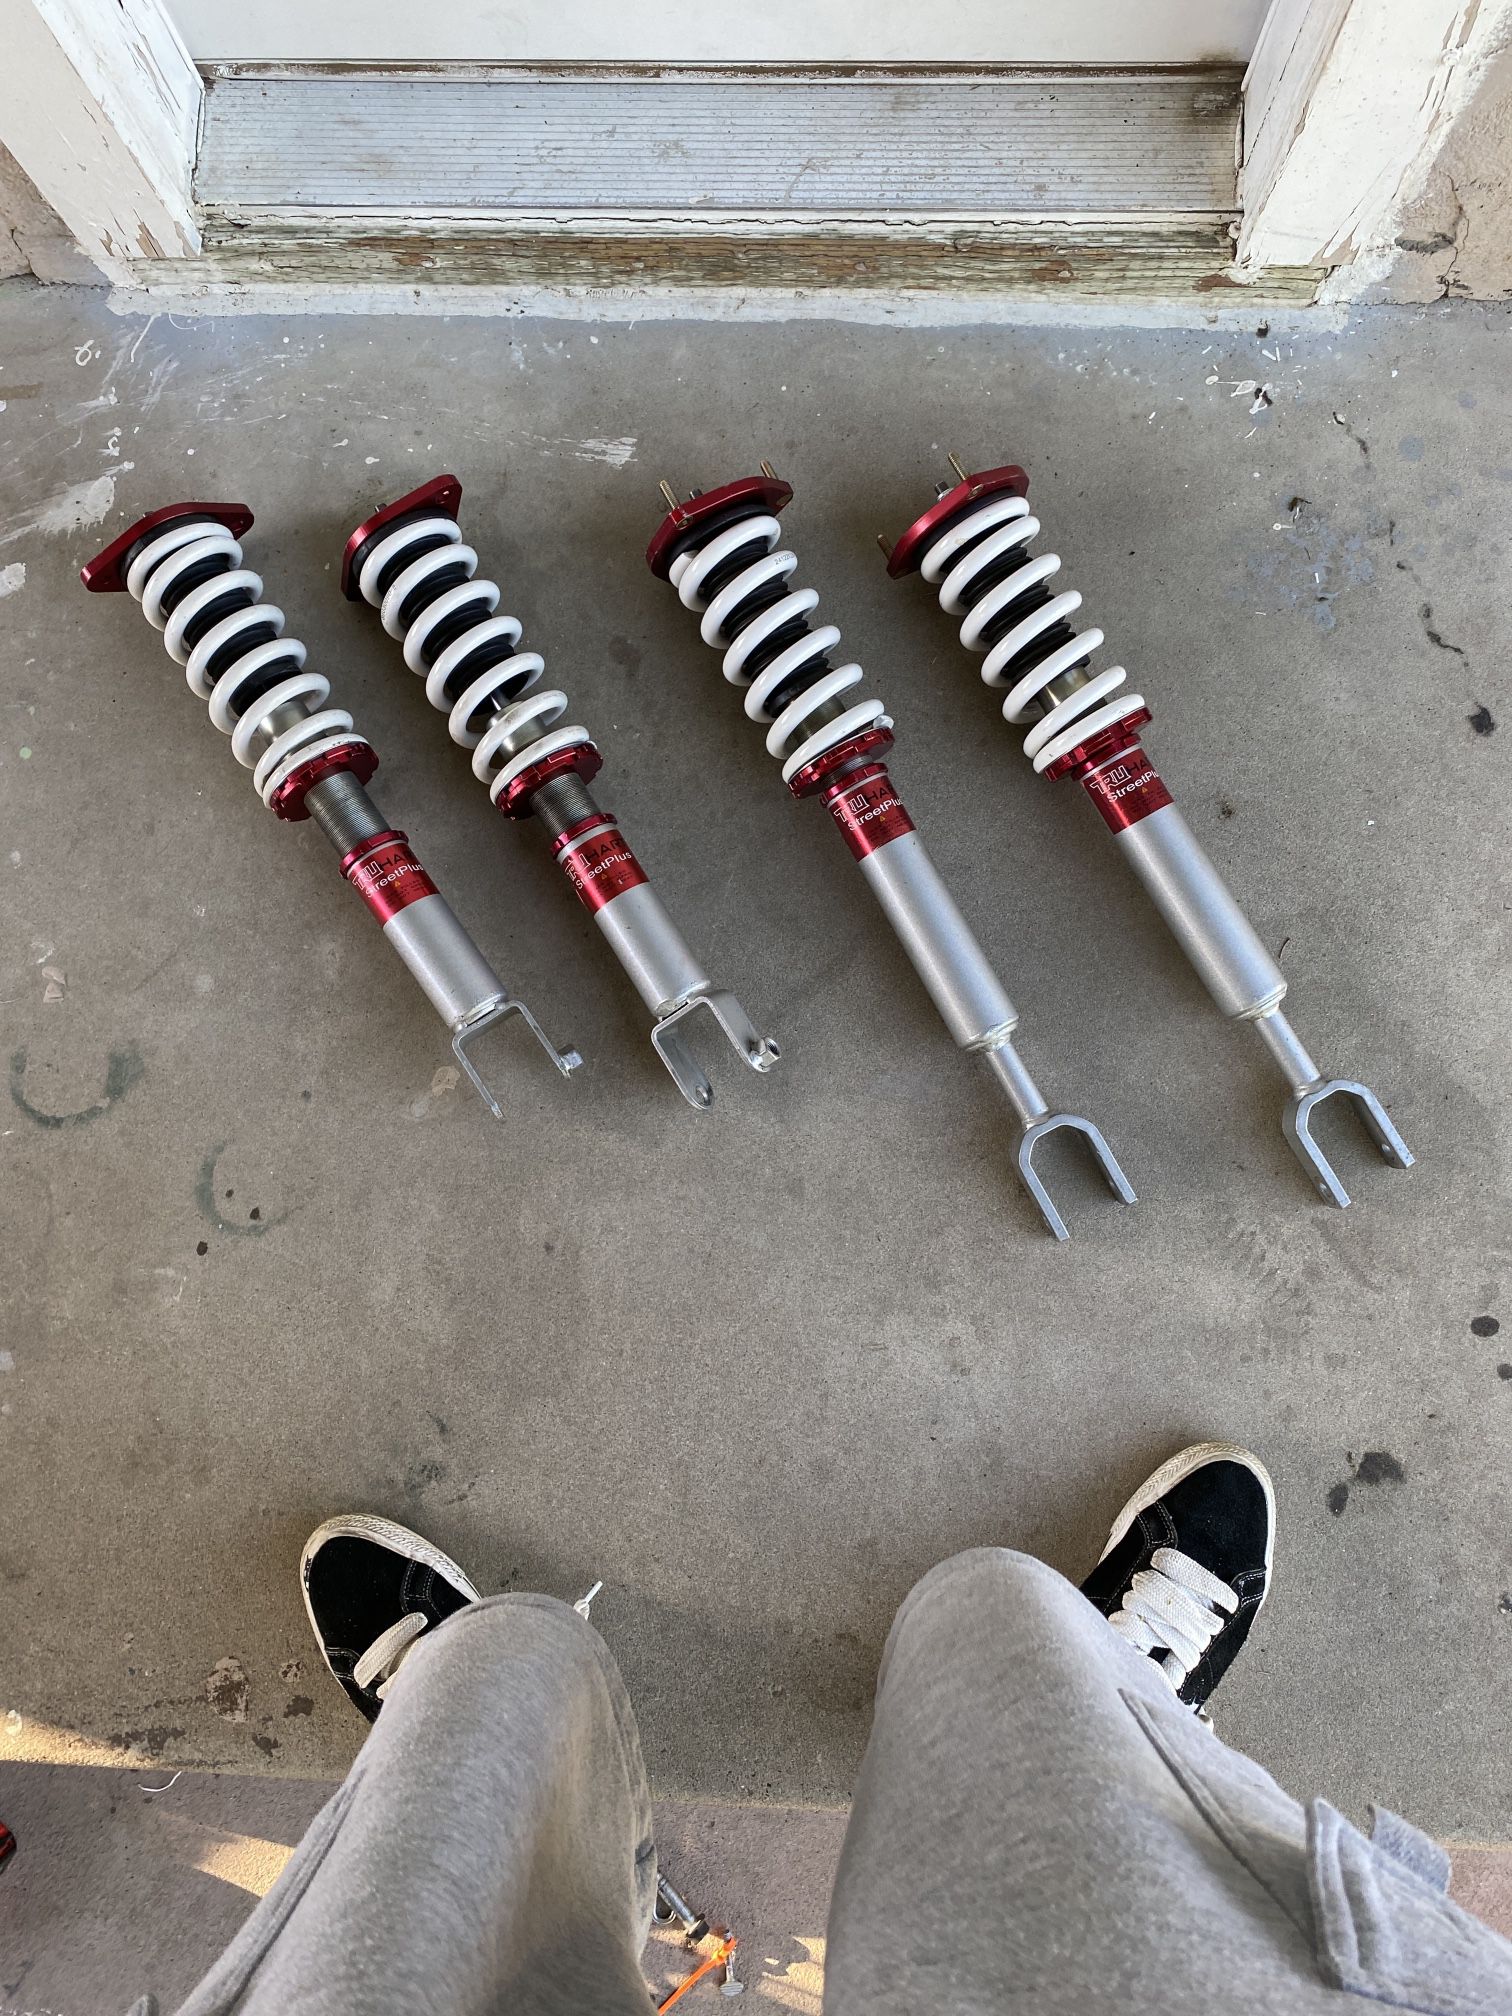 G35 / 350z Truhart Coilovers 